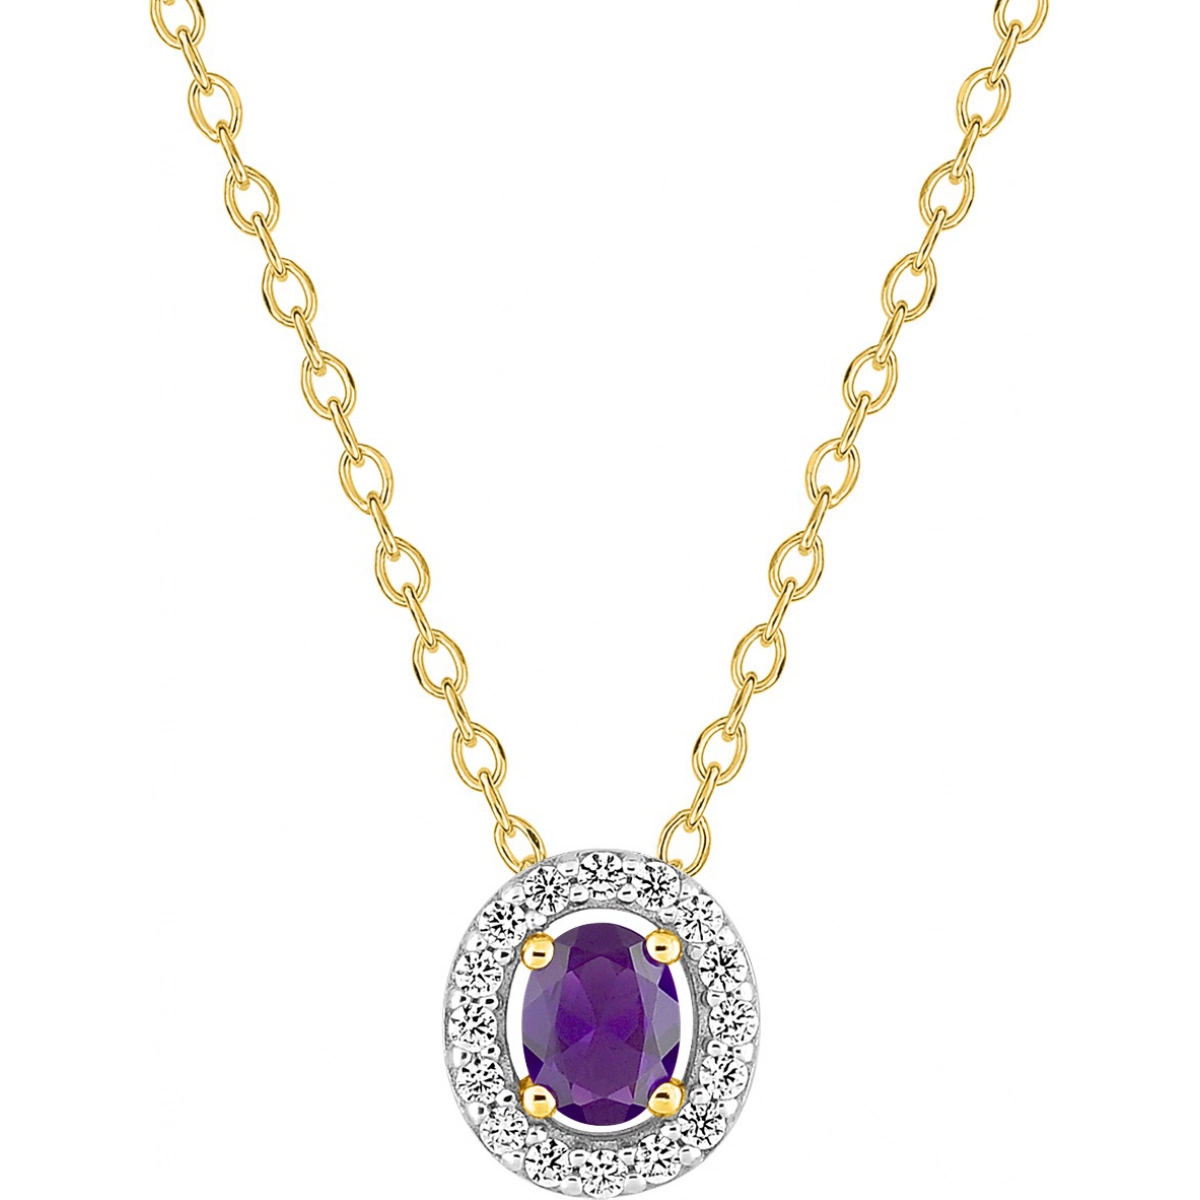 Necklace w. synth amethyst and cz gold plated Brass  Lua Blanca  132204.7.0